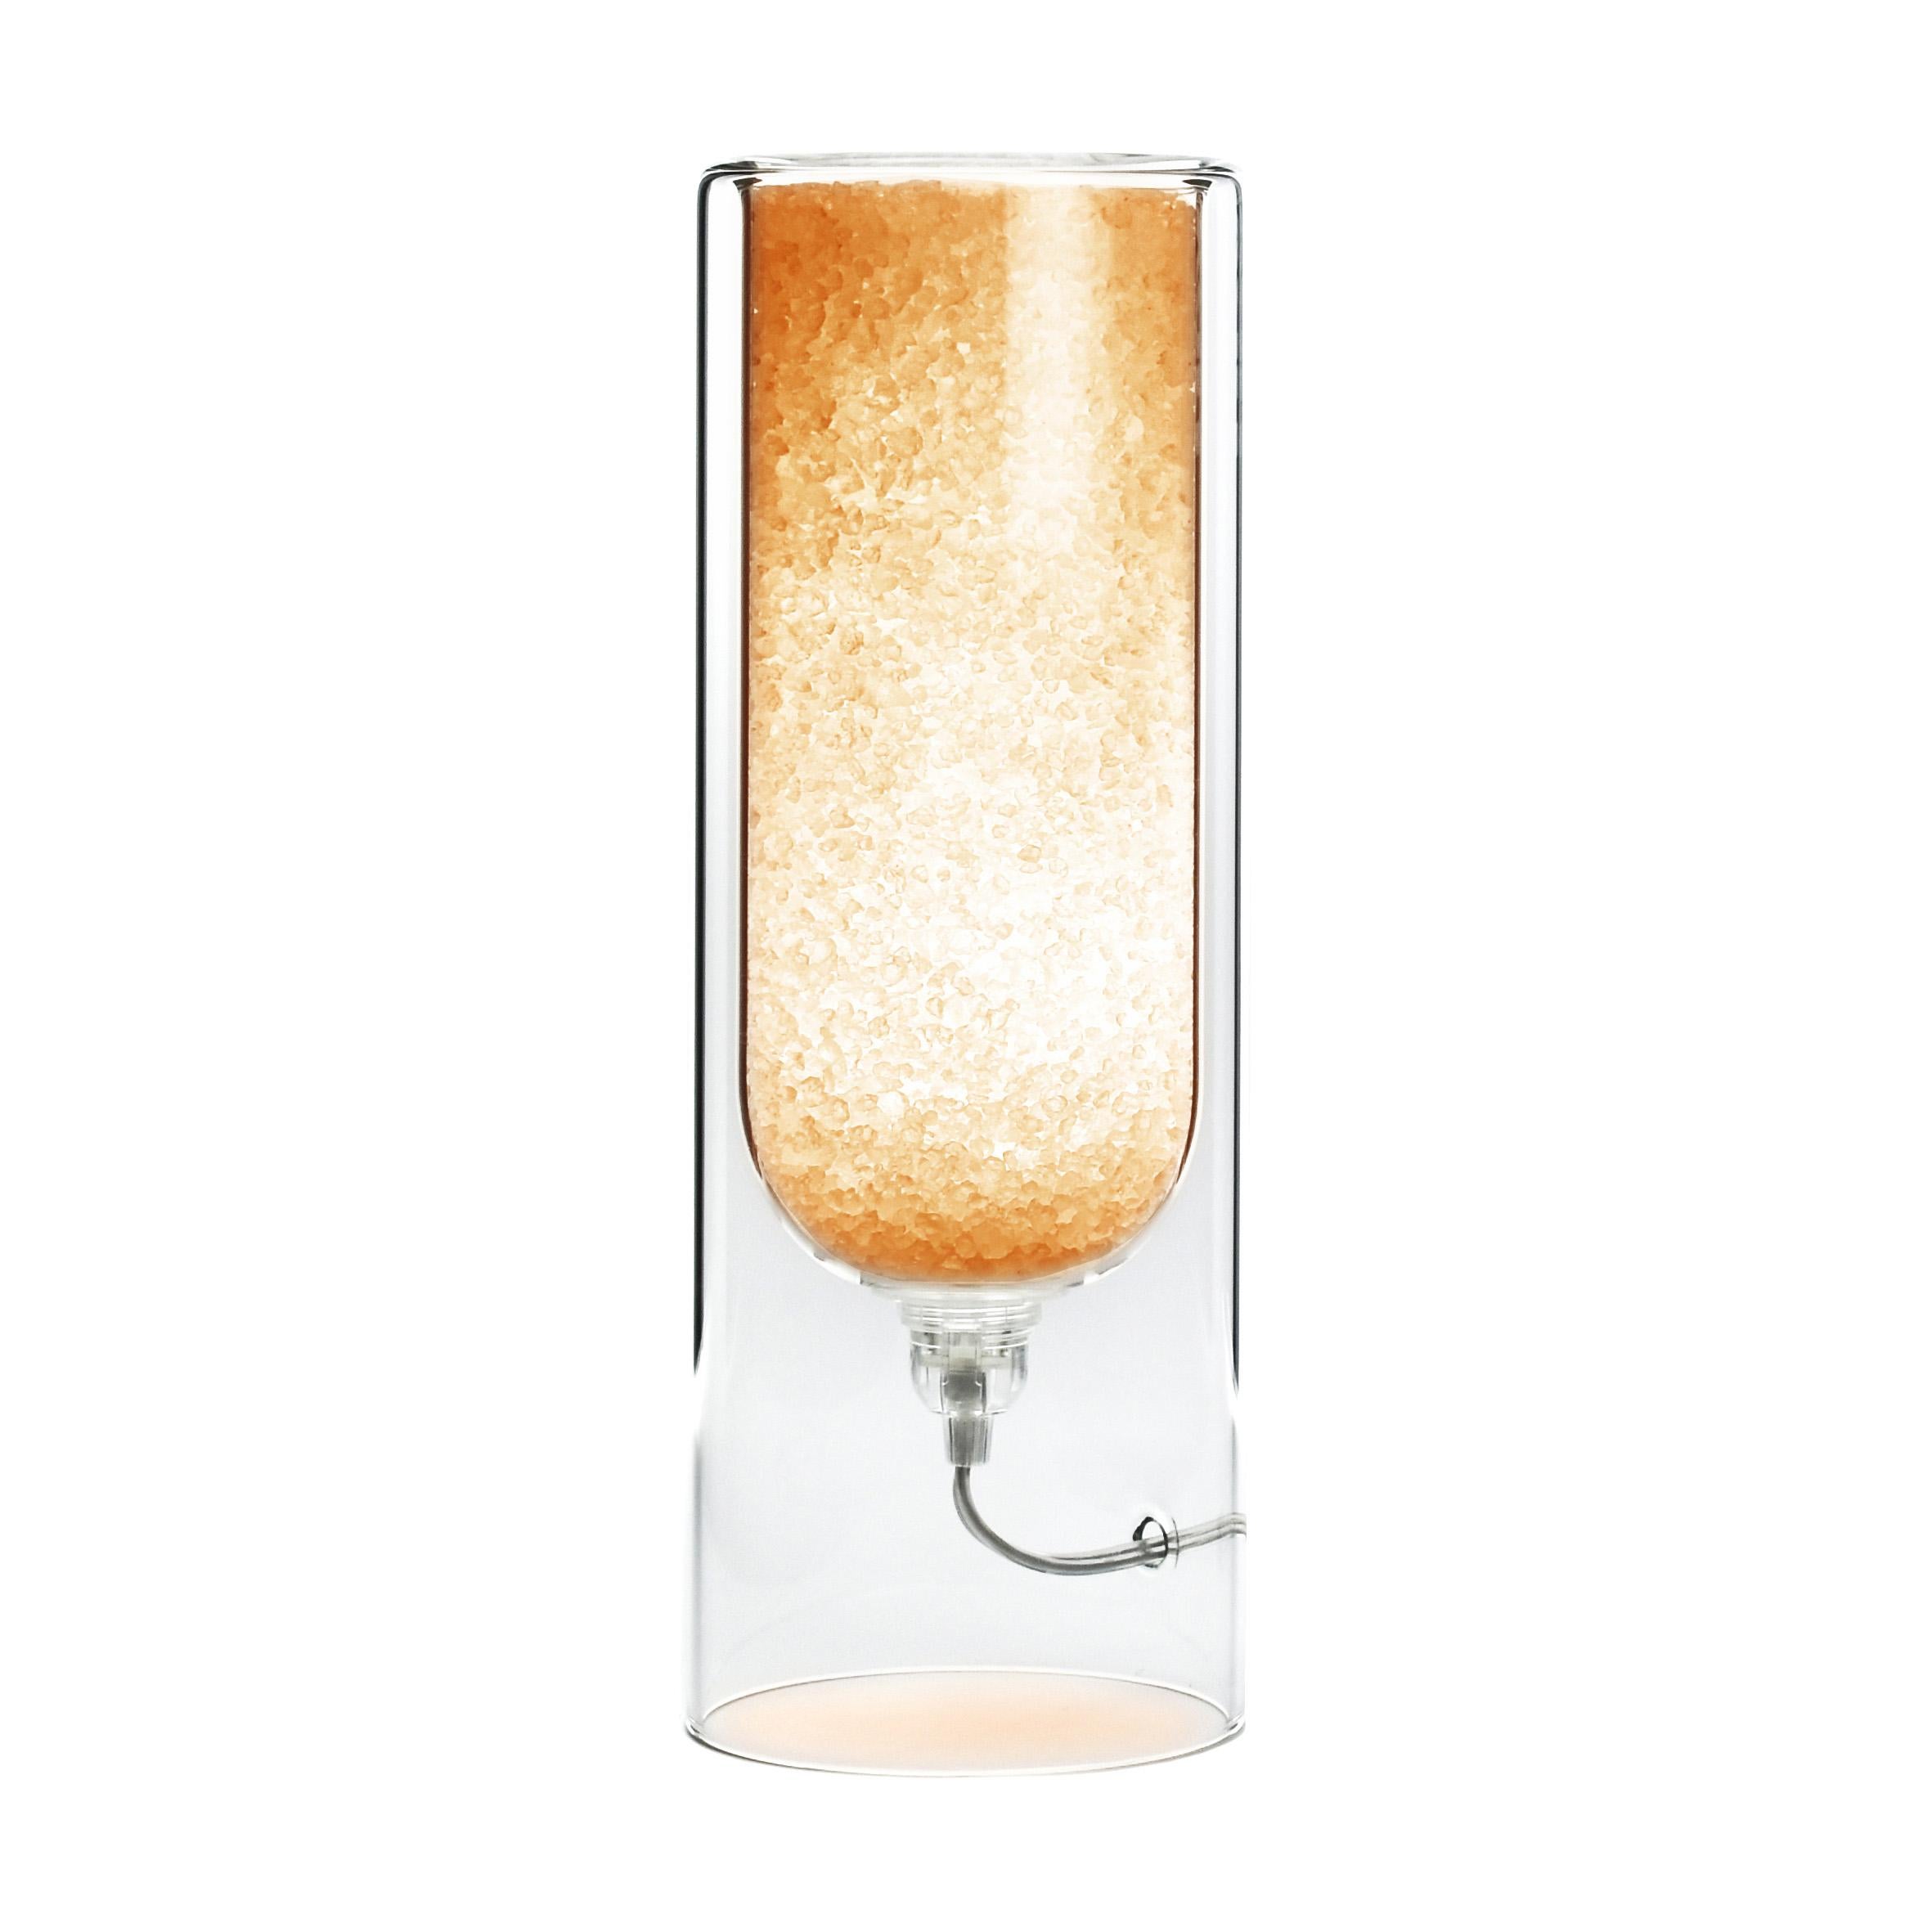 Orange Rocklumìna XXS table lamp by Coki Barbieri.
Dimensions: W 12 x D 12 x H 33.5 cm.
Materials: Italian rock salt crystals colored with natural pigments, mineral pigments from Italian soil and borosilicate glass.

All our lamps can be wired